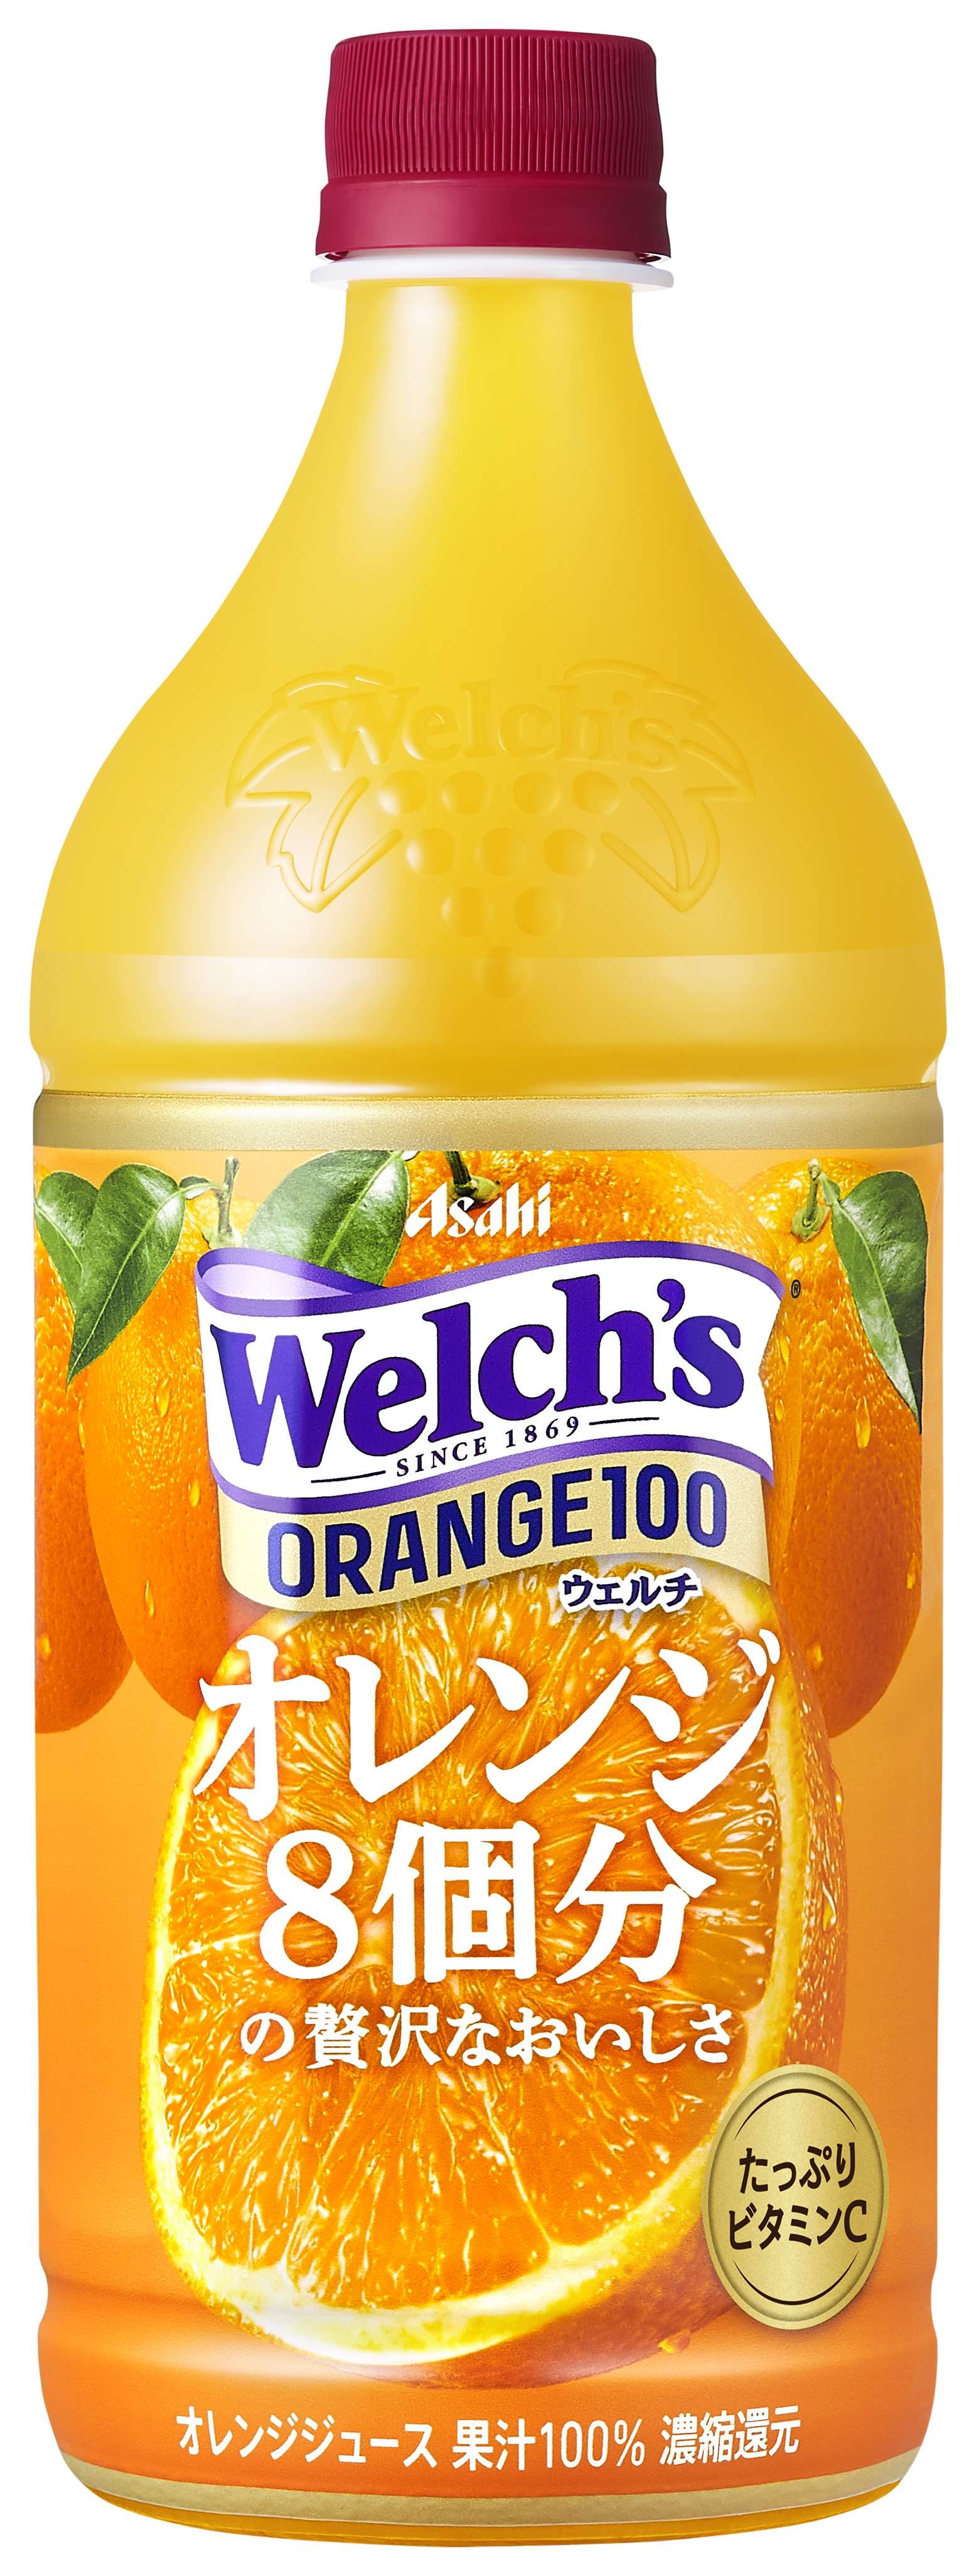 Welch'sオレンジ100　ＰＥＴ800ｇ